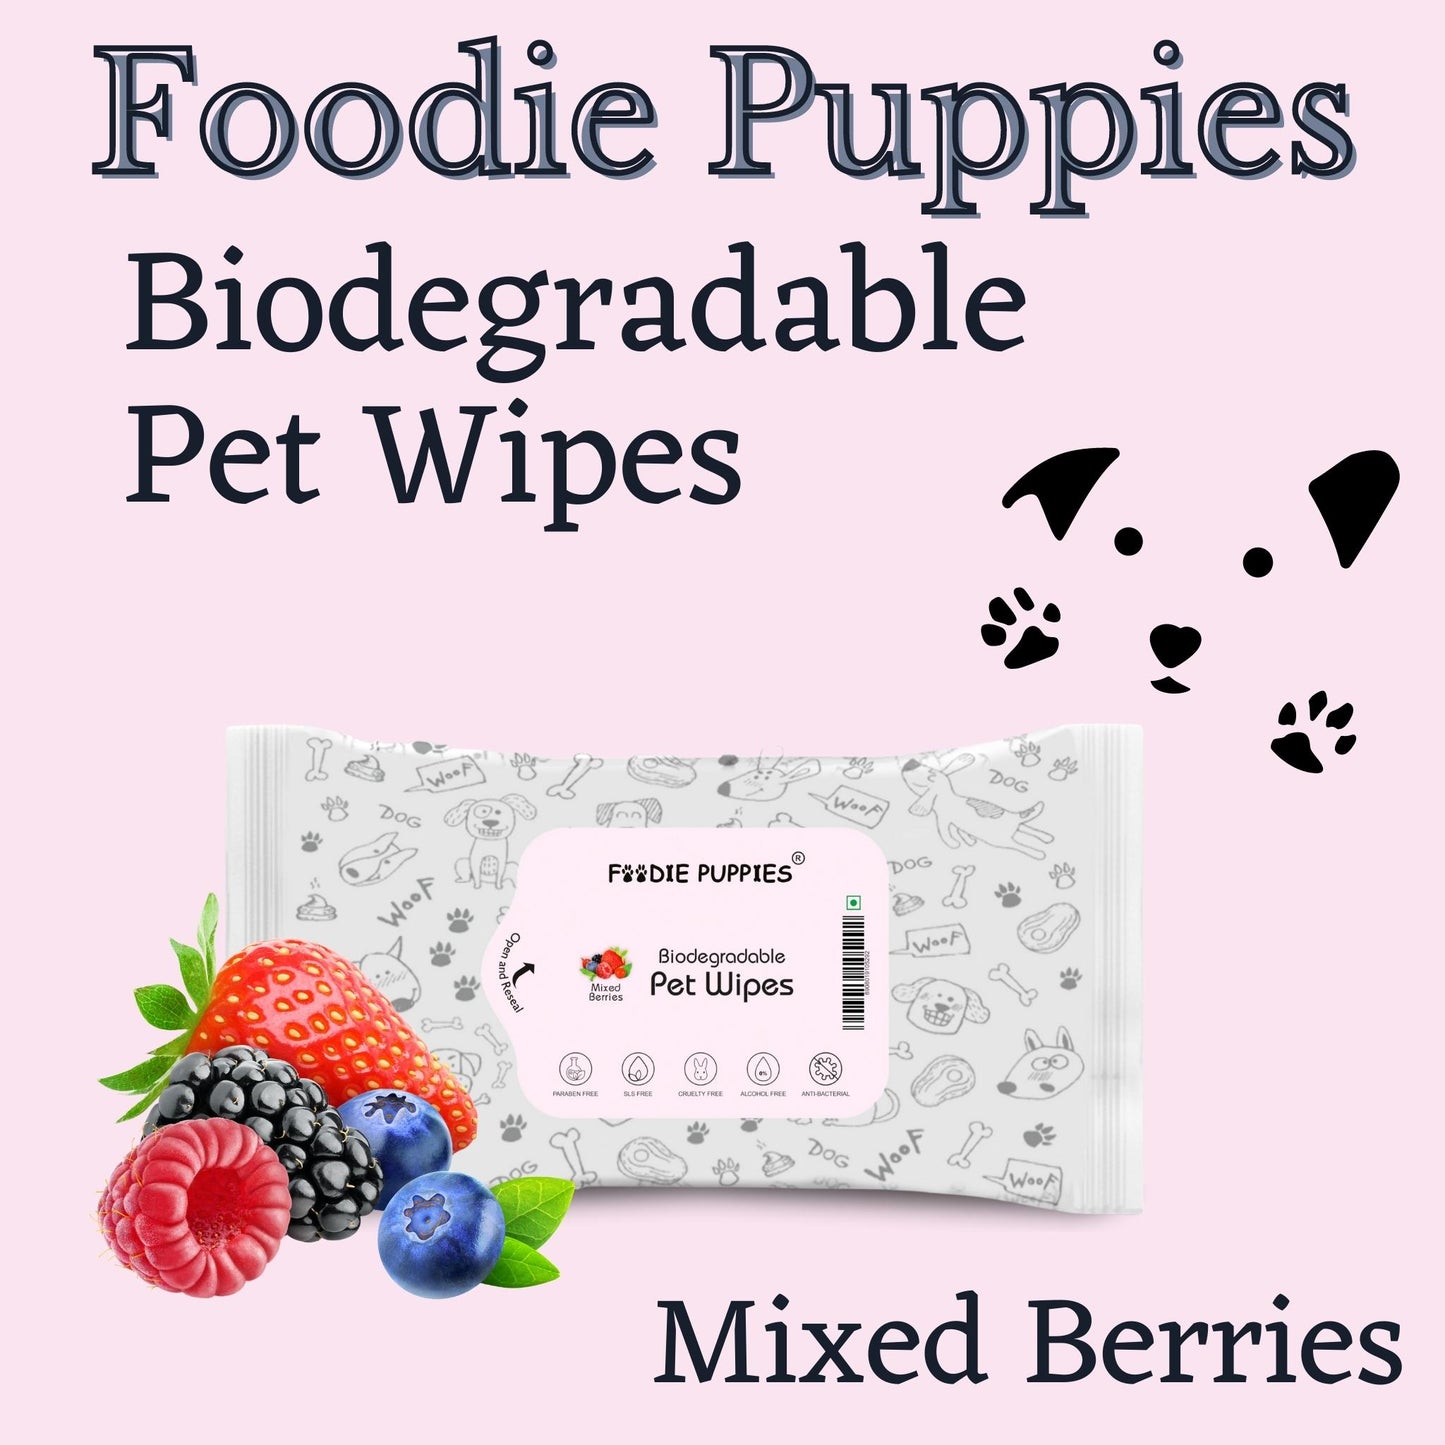 Foodie Puppies Biodegradable Mixed Berries Pet Wipes 10 Pulls, Pack of 6